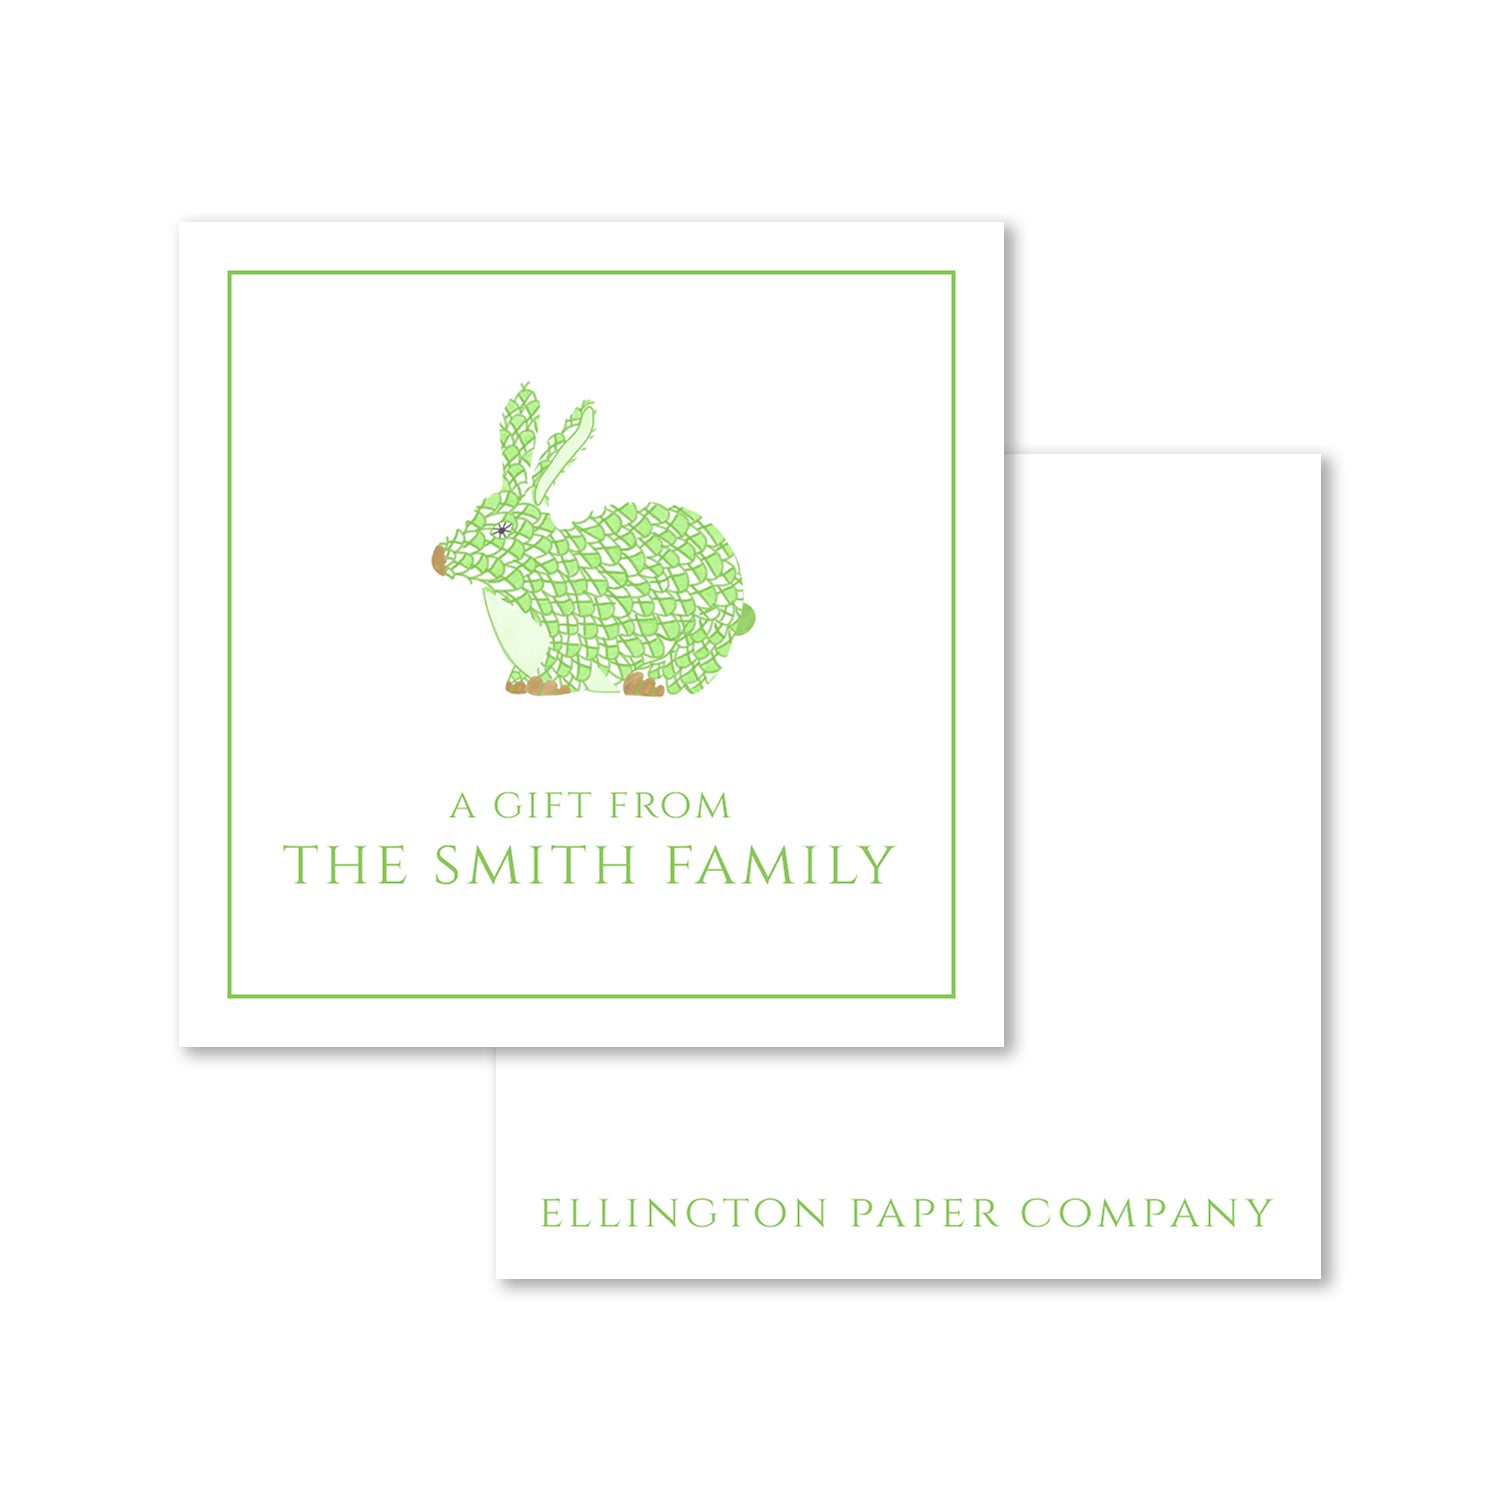 Fishscale Pattern Key Lime Bunny Enclosure Cards and Stickers